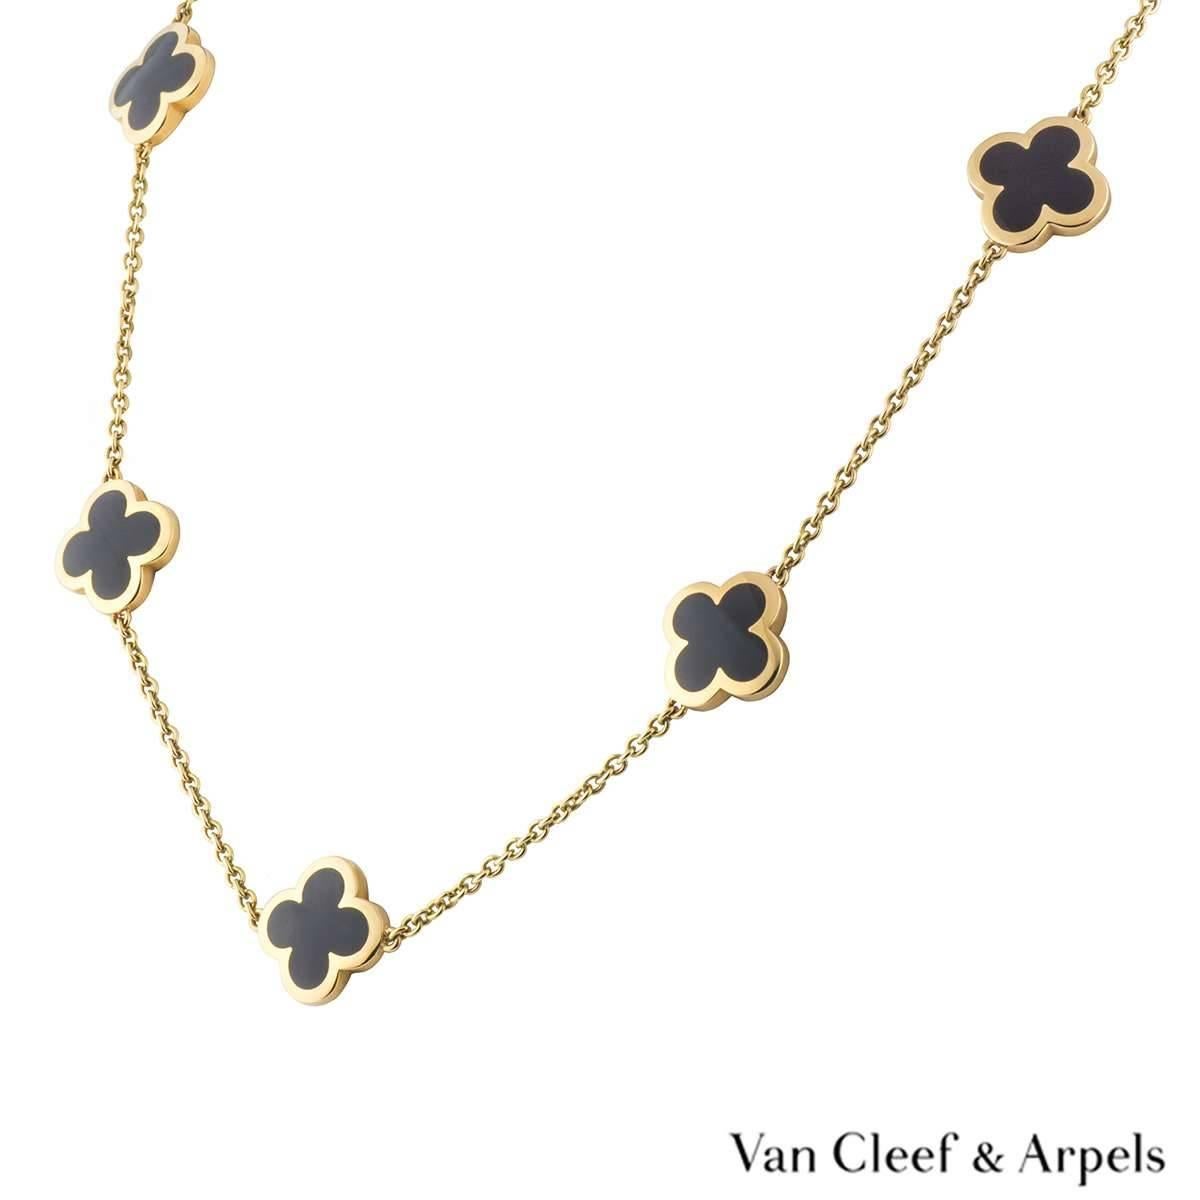 A beautiful 18k yellow gold necklace from the Van Cleef & Arpels Magic Alhambra collection. The necklace is composed of 14 iconic four leaf clover motifs, set to the centre with black onyx inlays. Each motif features a beaded outer edge and are